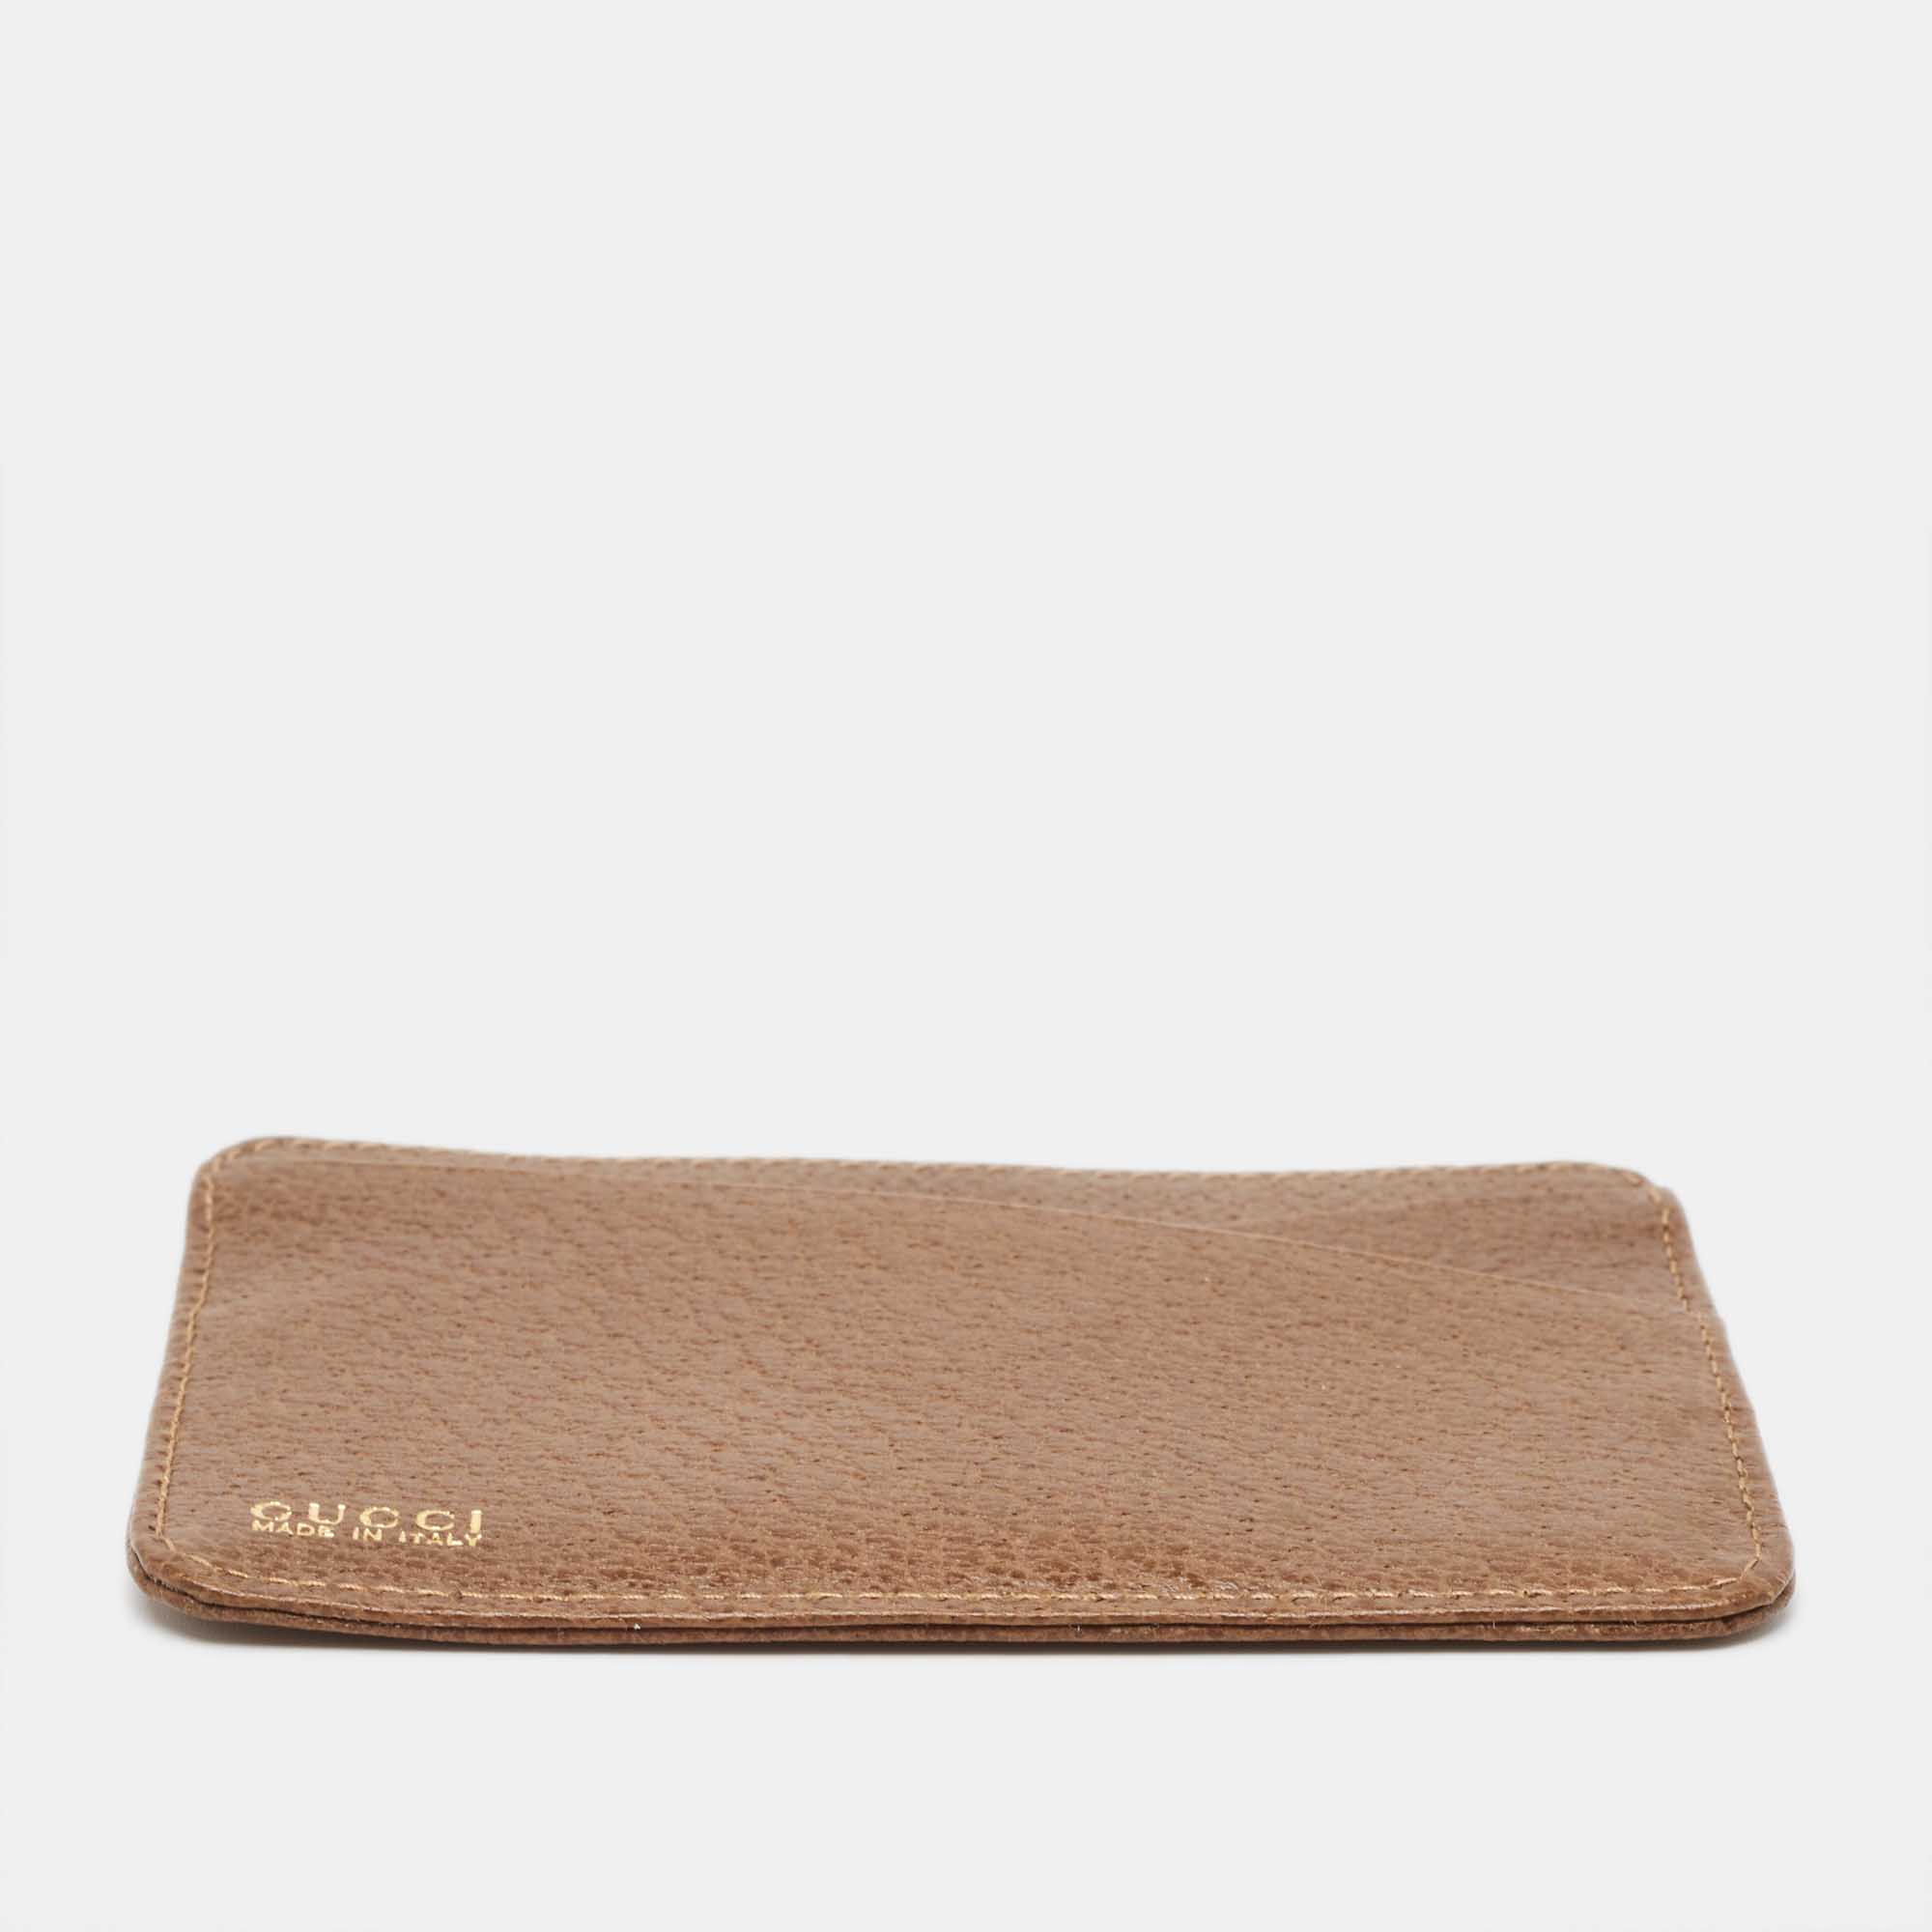 Gucci Brown Leather Slim Card Holder